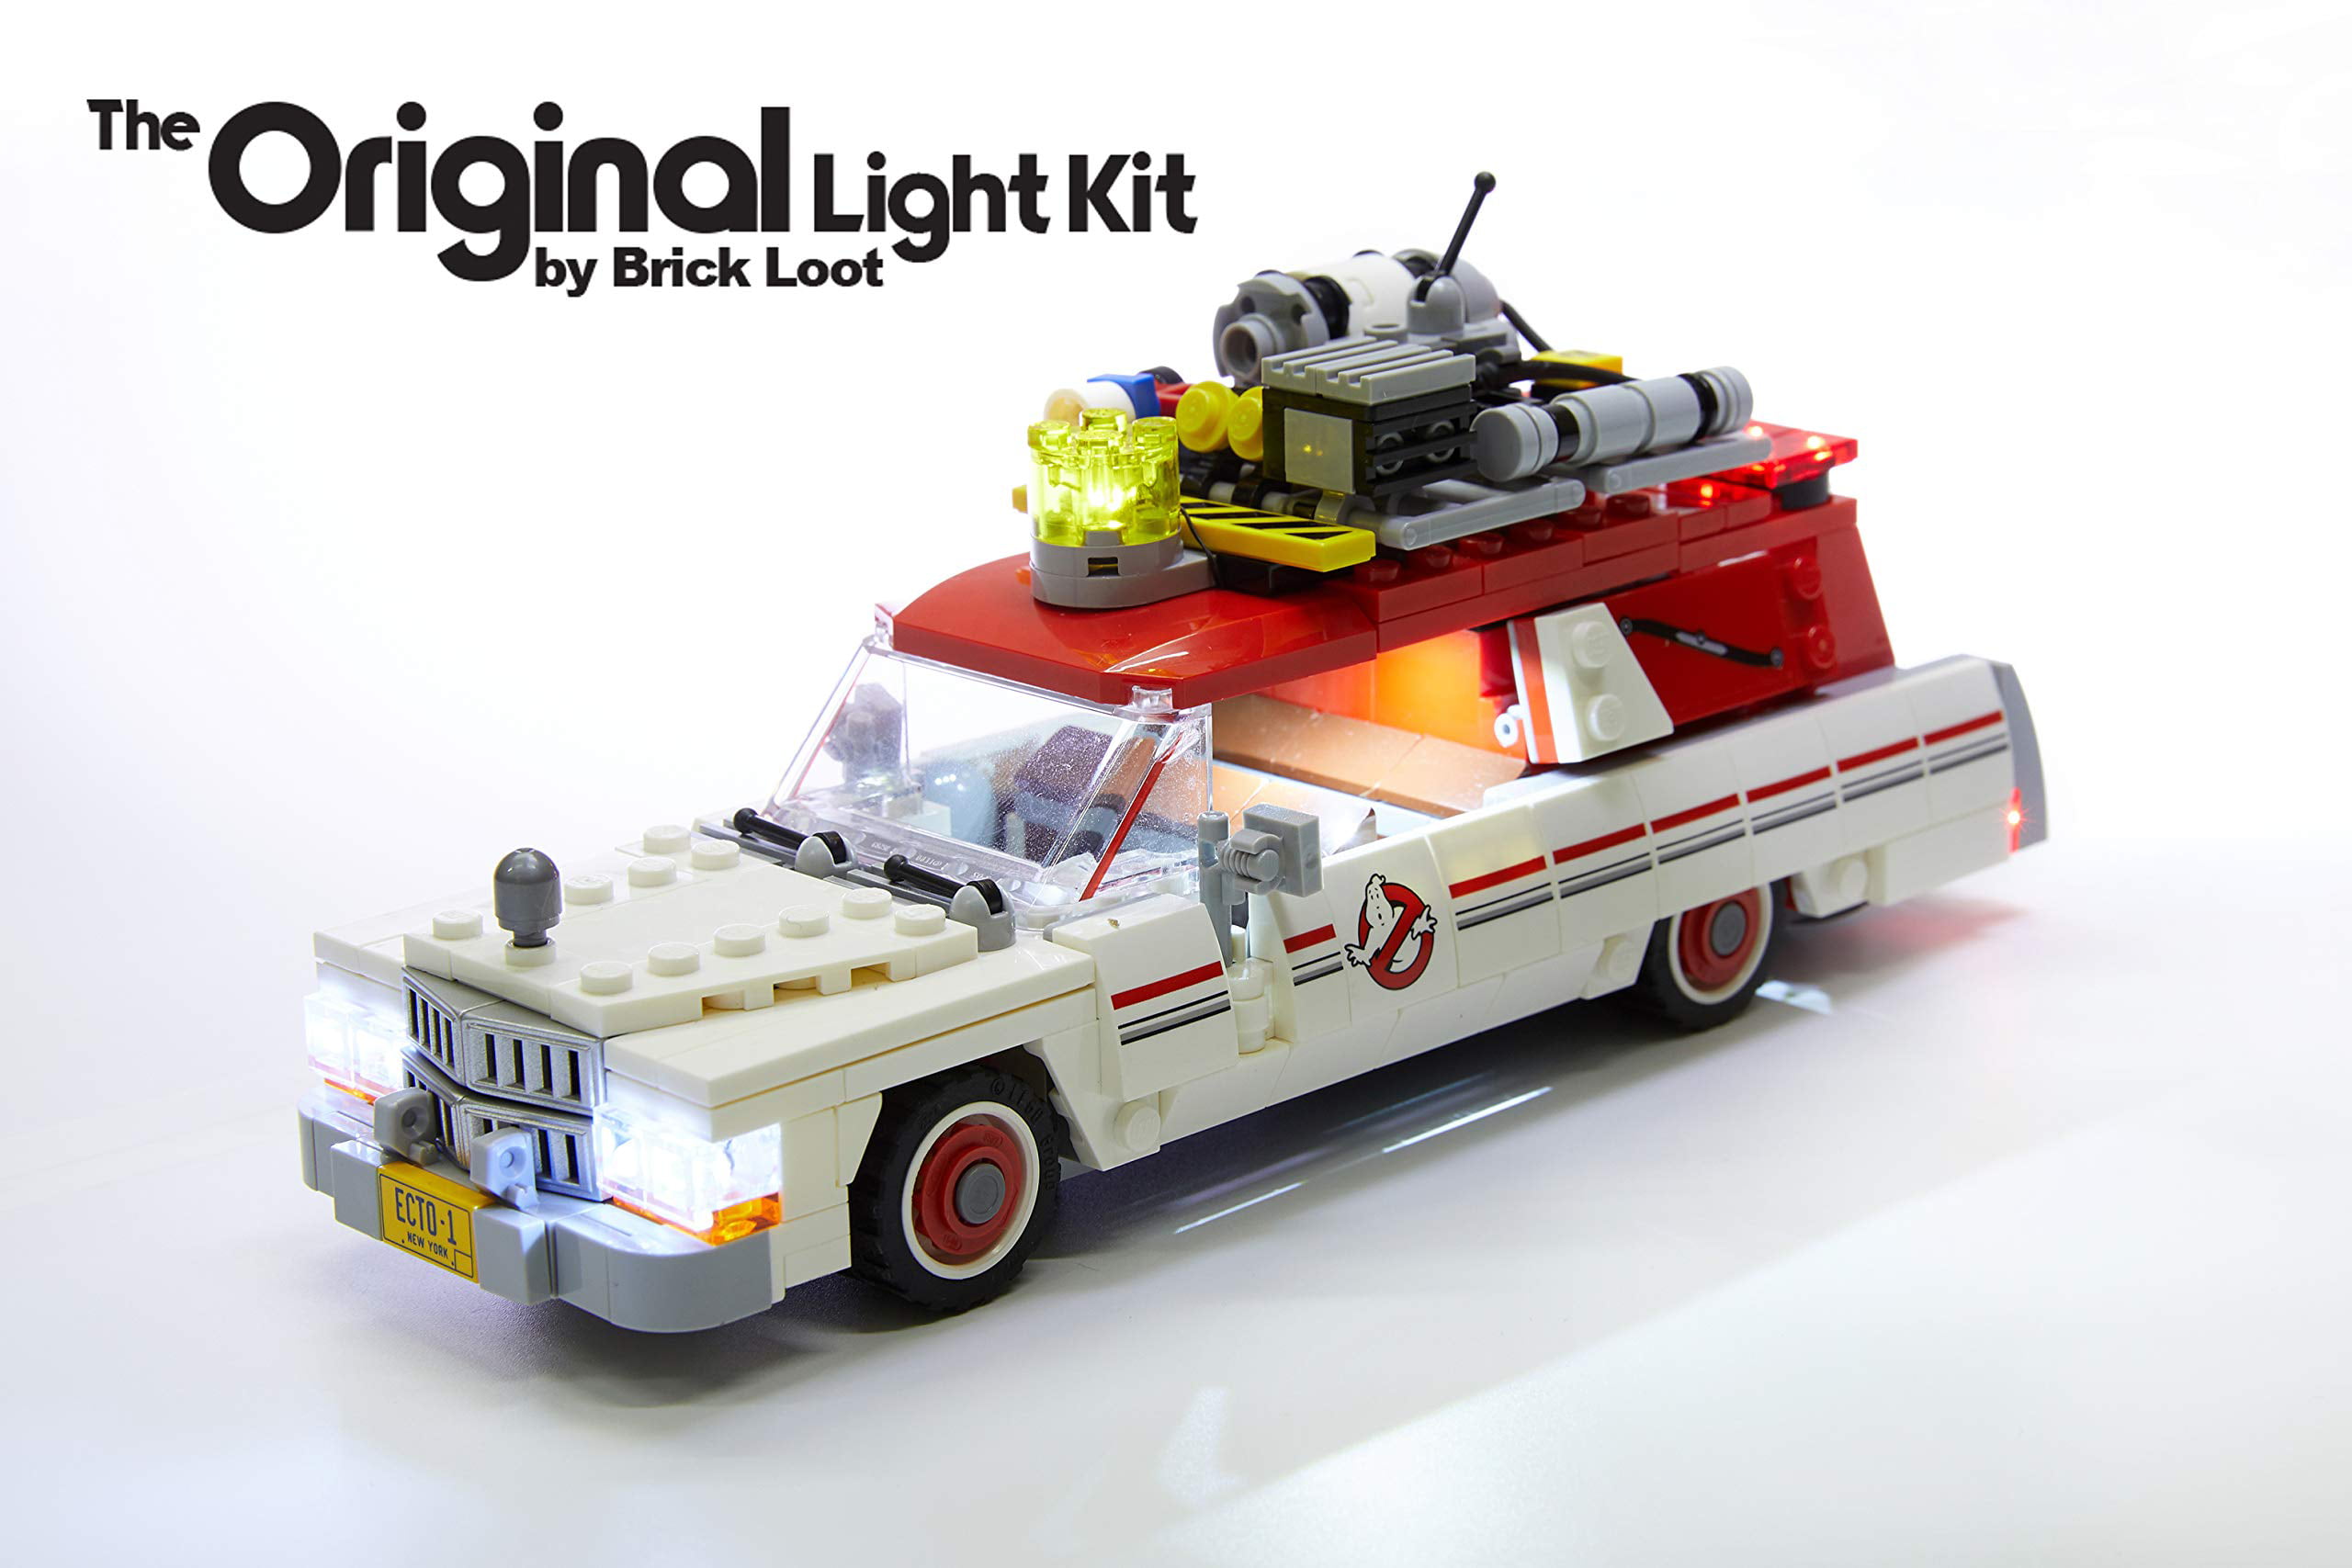 Brick Loot Lighting Kit for Lego Ghostbusters Ecto1 & 2 Set 75828 (Ecto 1-2 car not Included) - Walmart.com